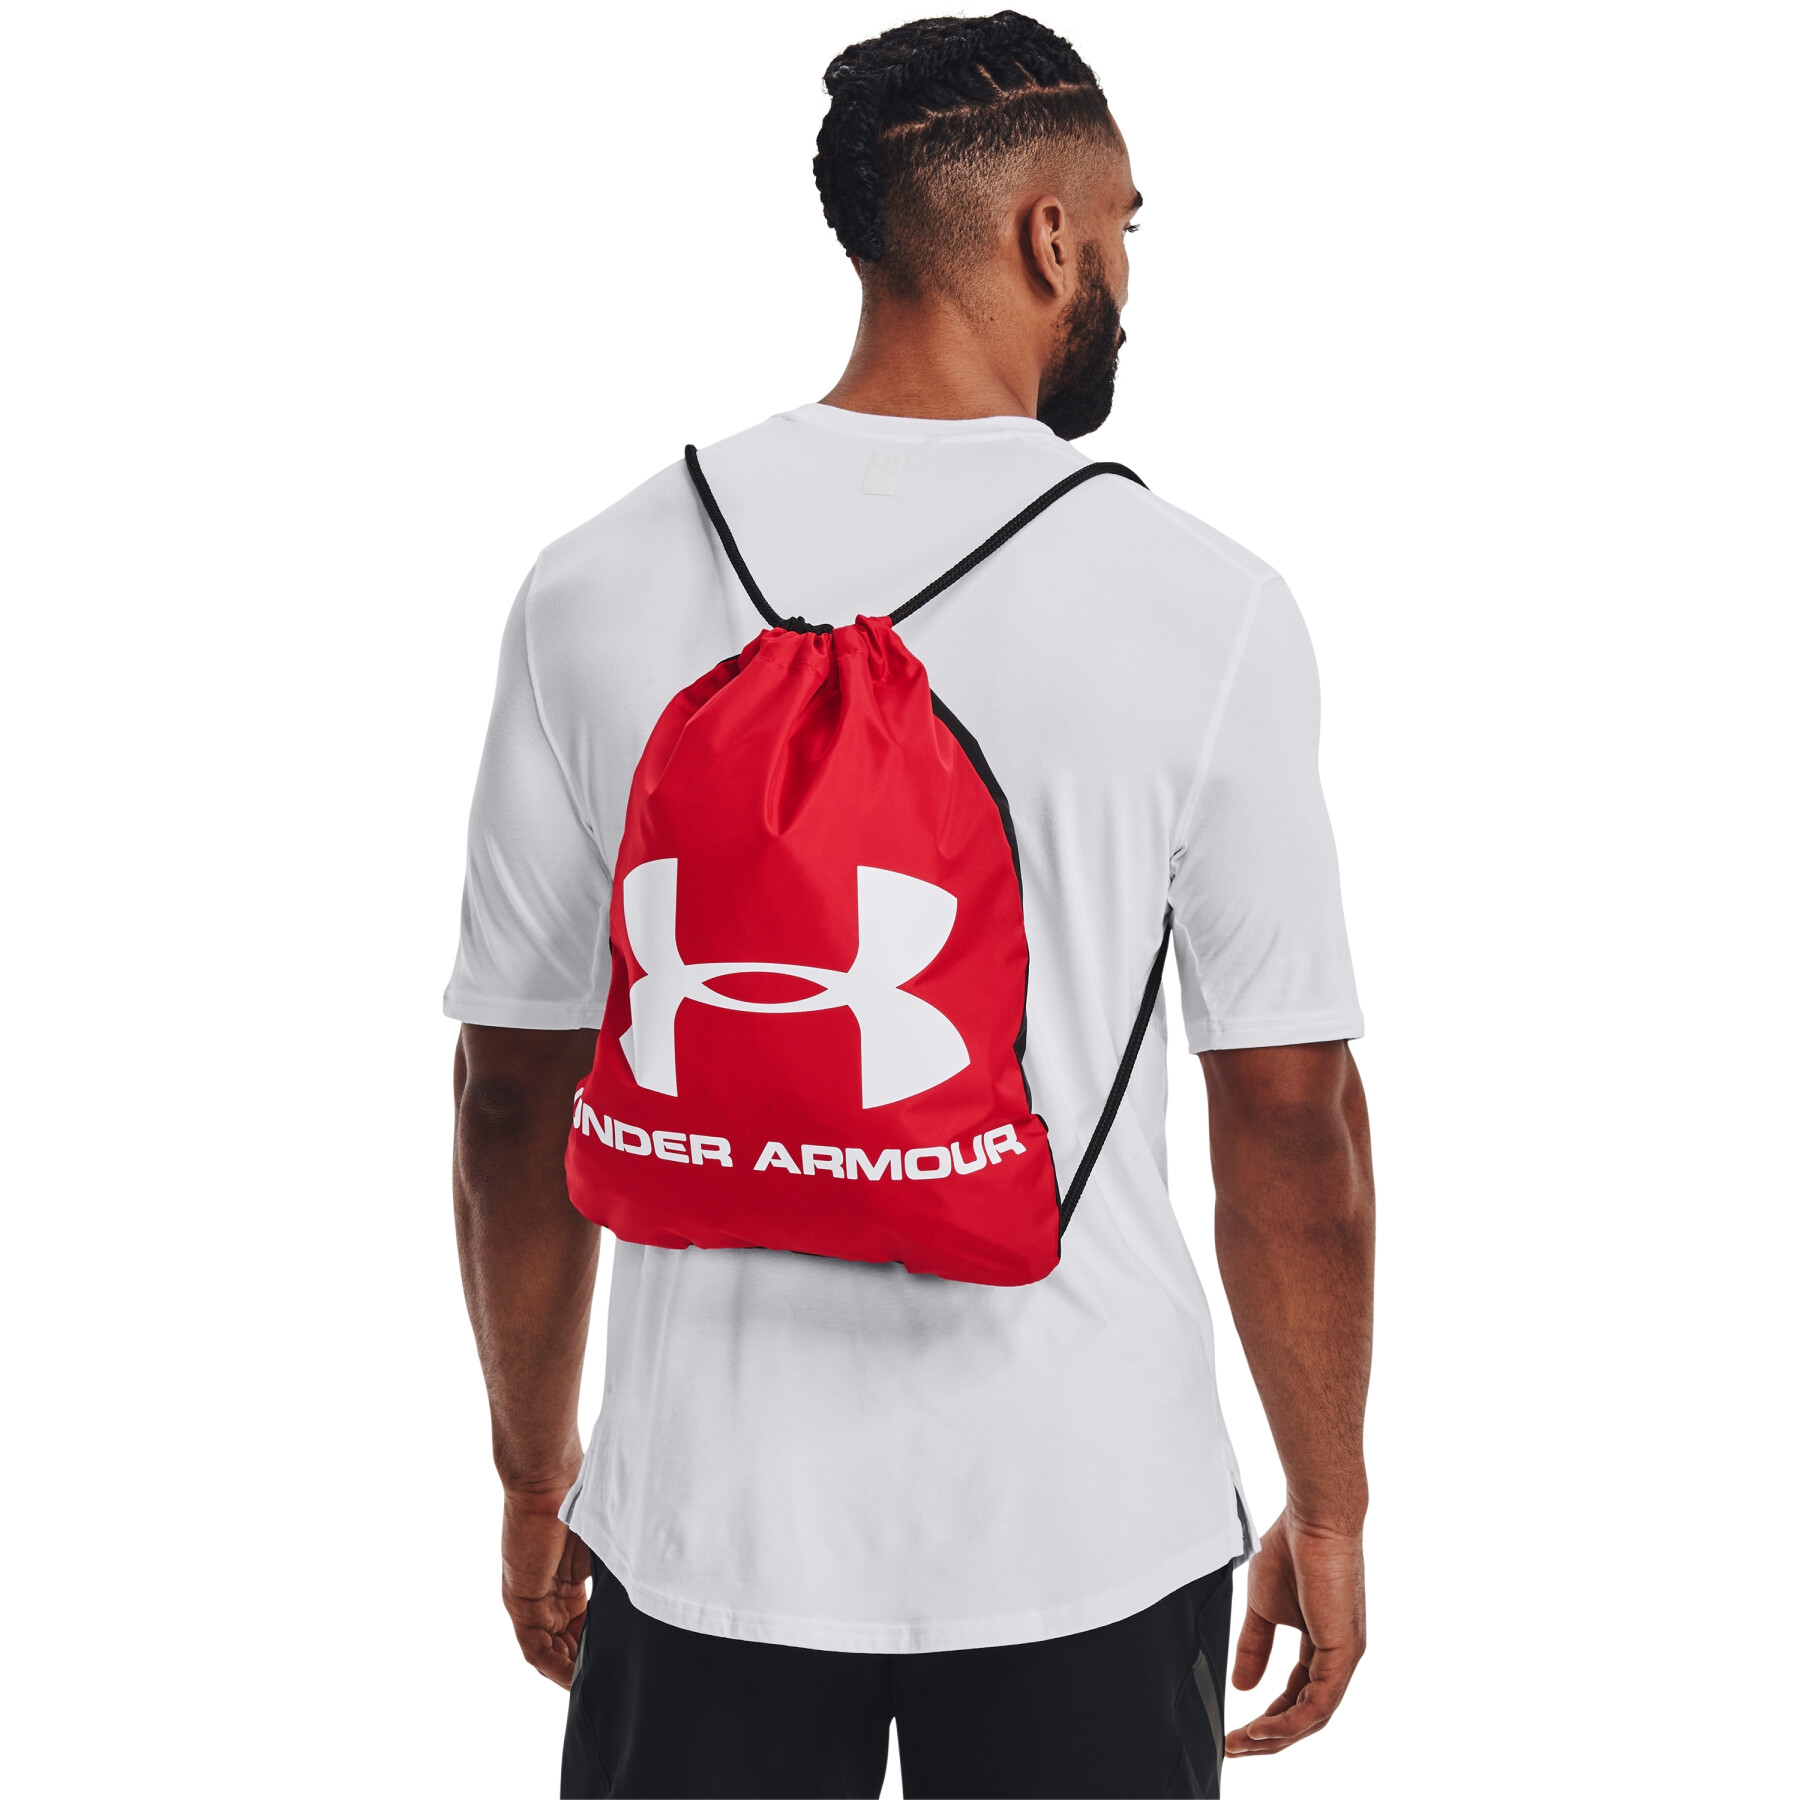 Rugzak Under Armour Ozsee